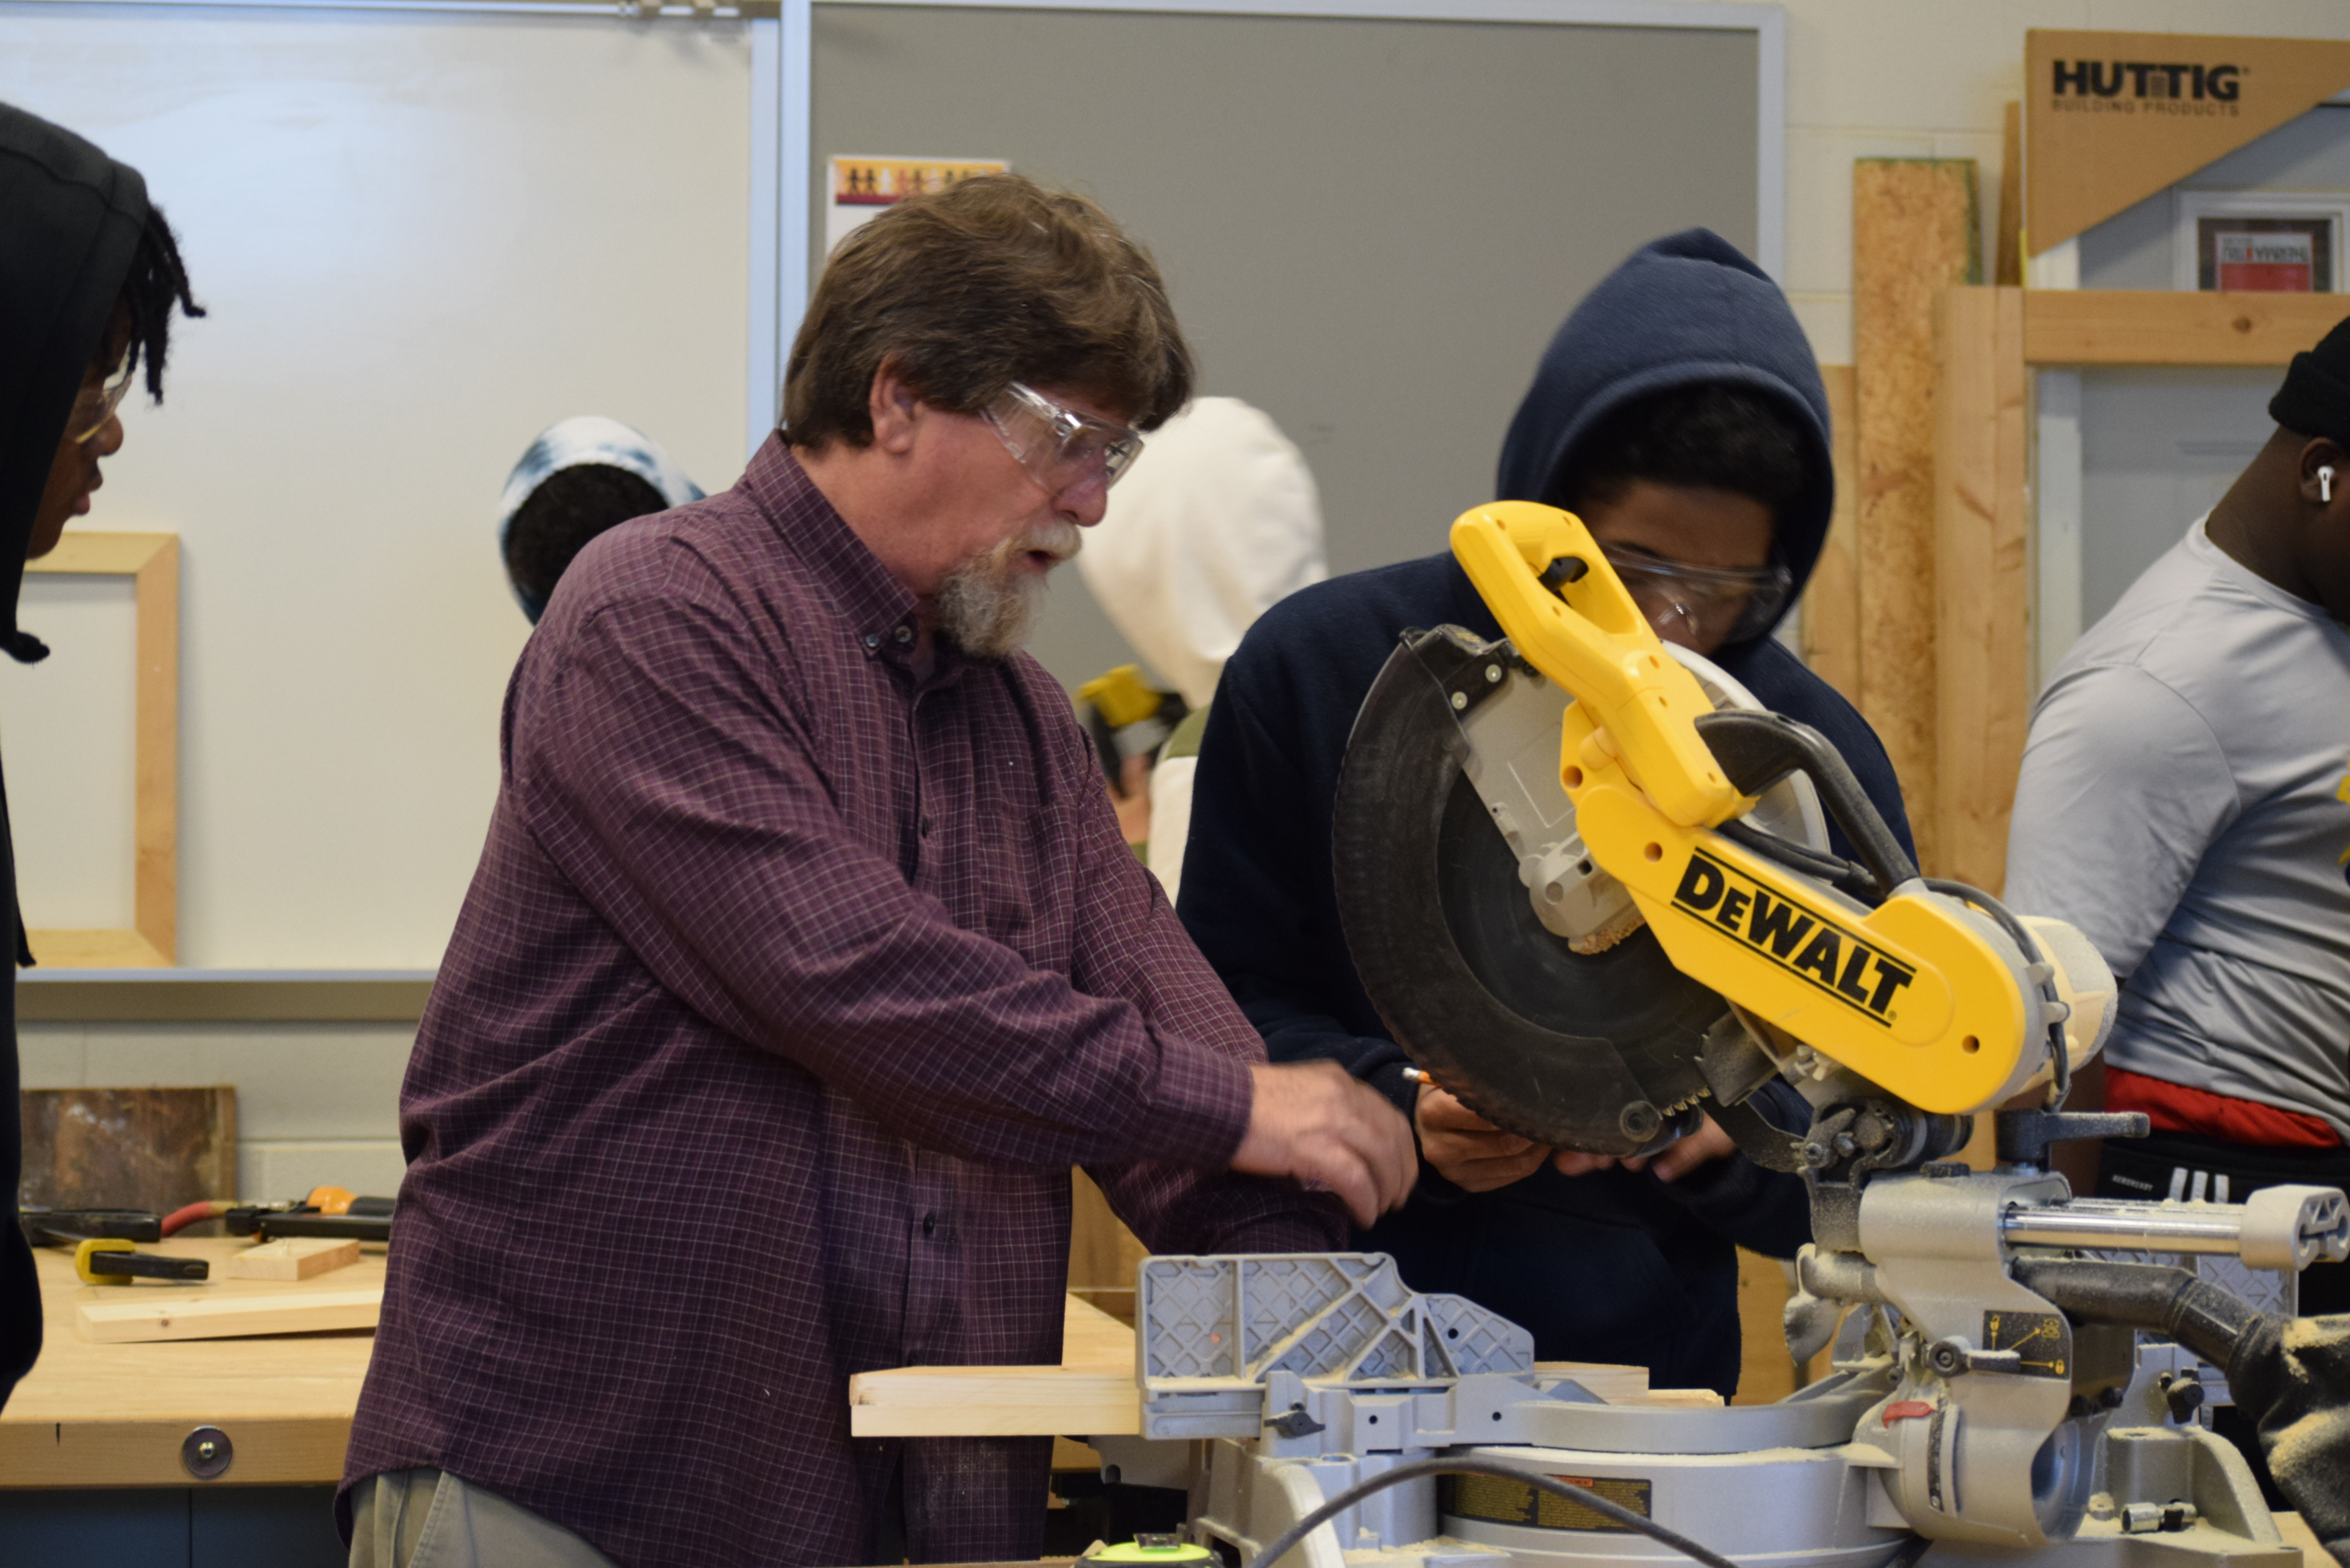 Carpentry teacher helping student use a piece of equipment